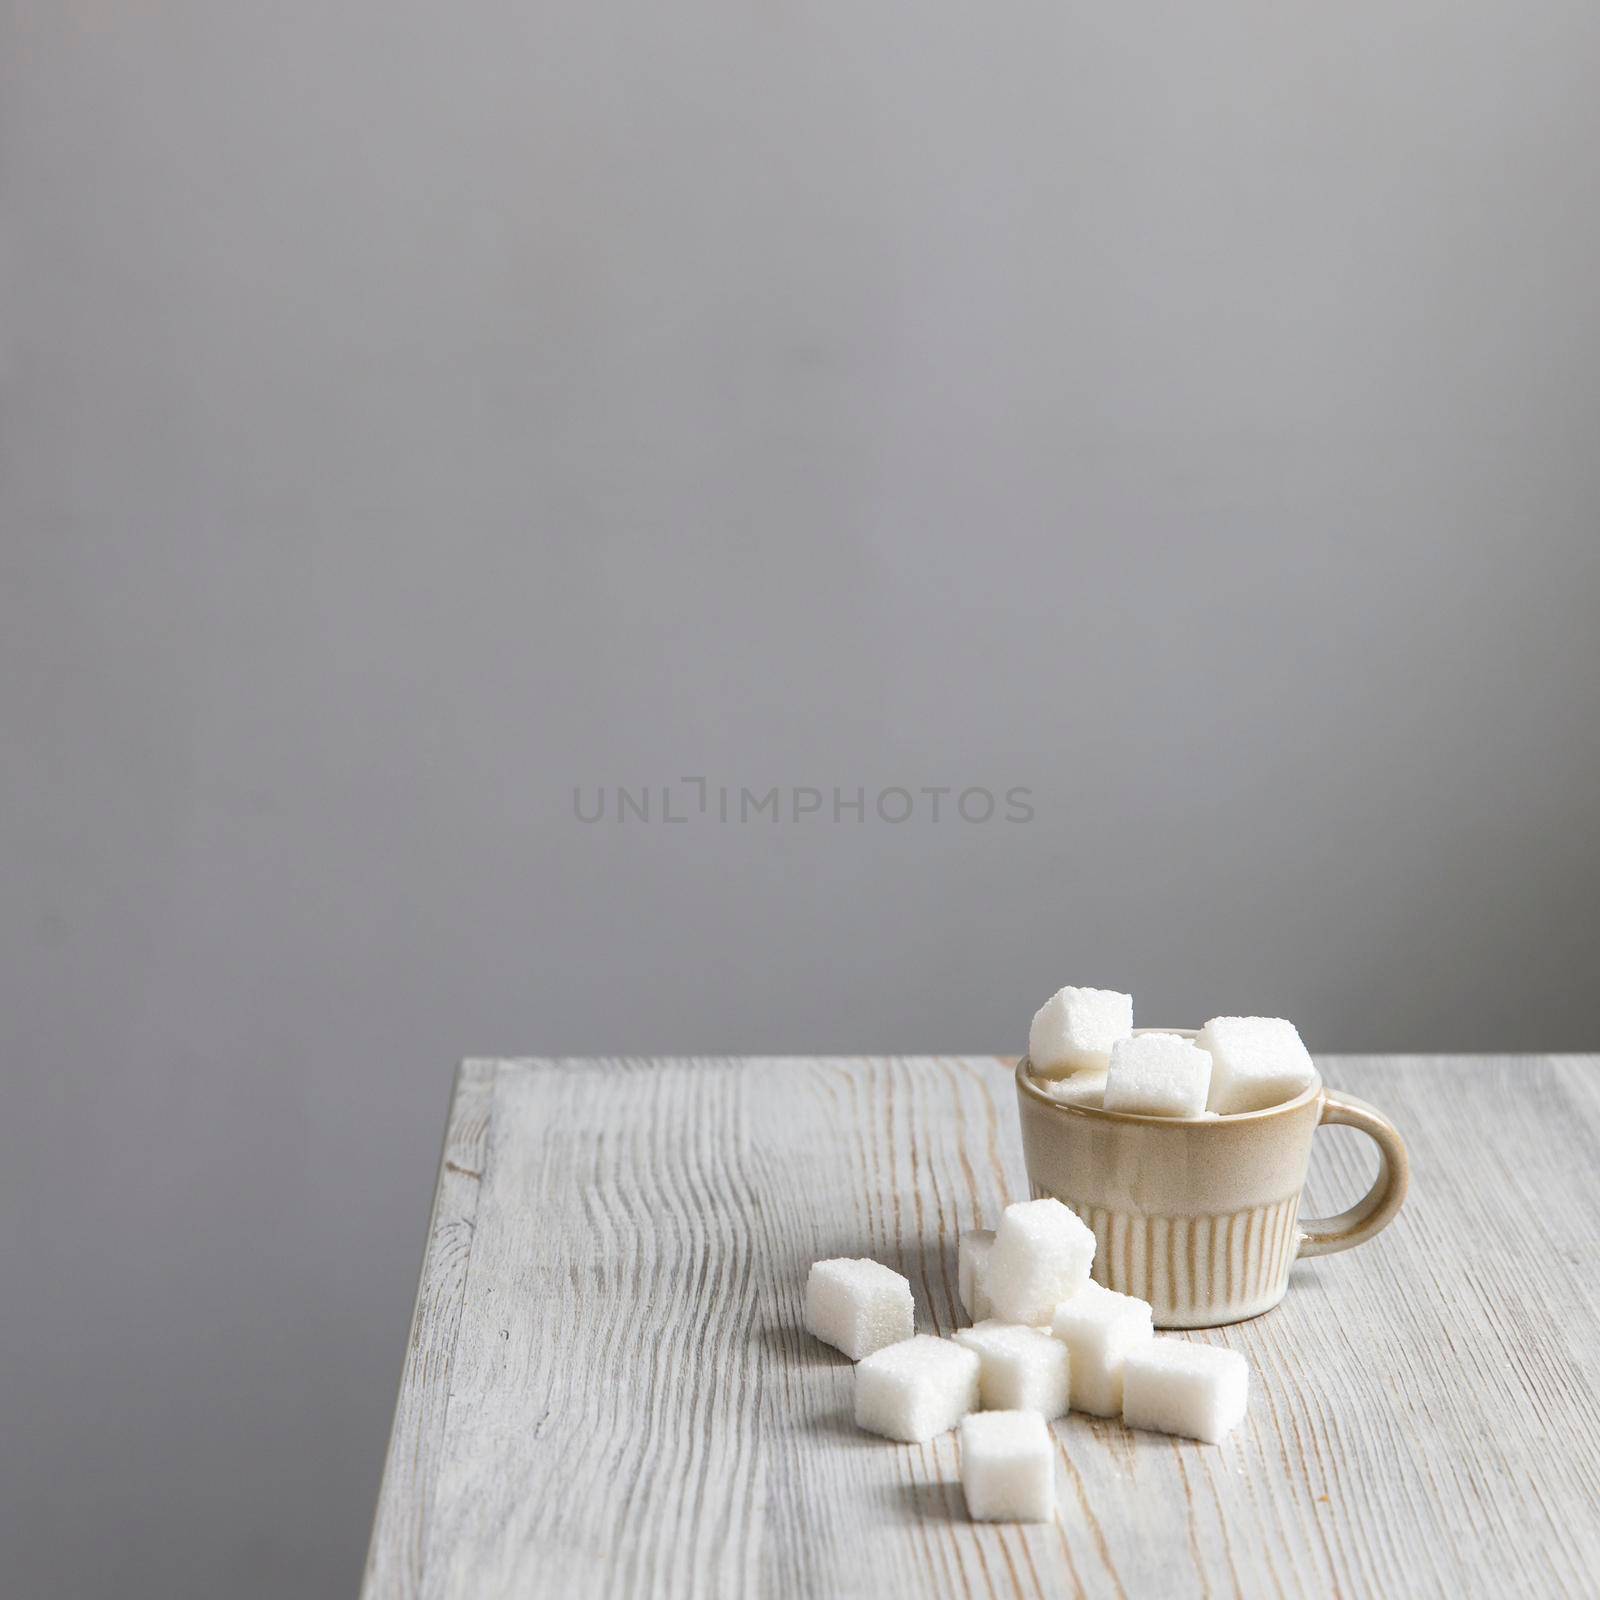 Cup with refined sugar in pieces scattered on the table